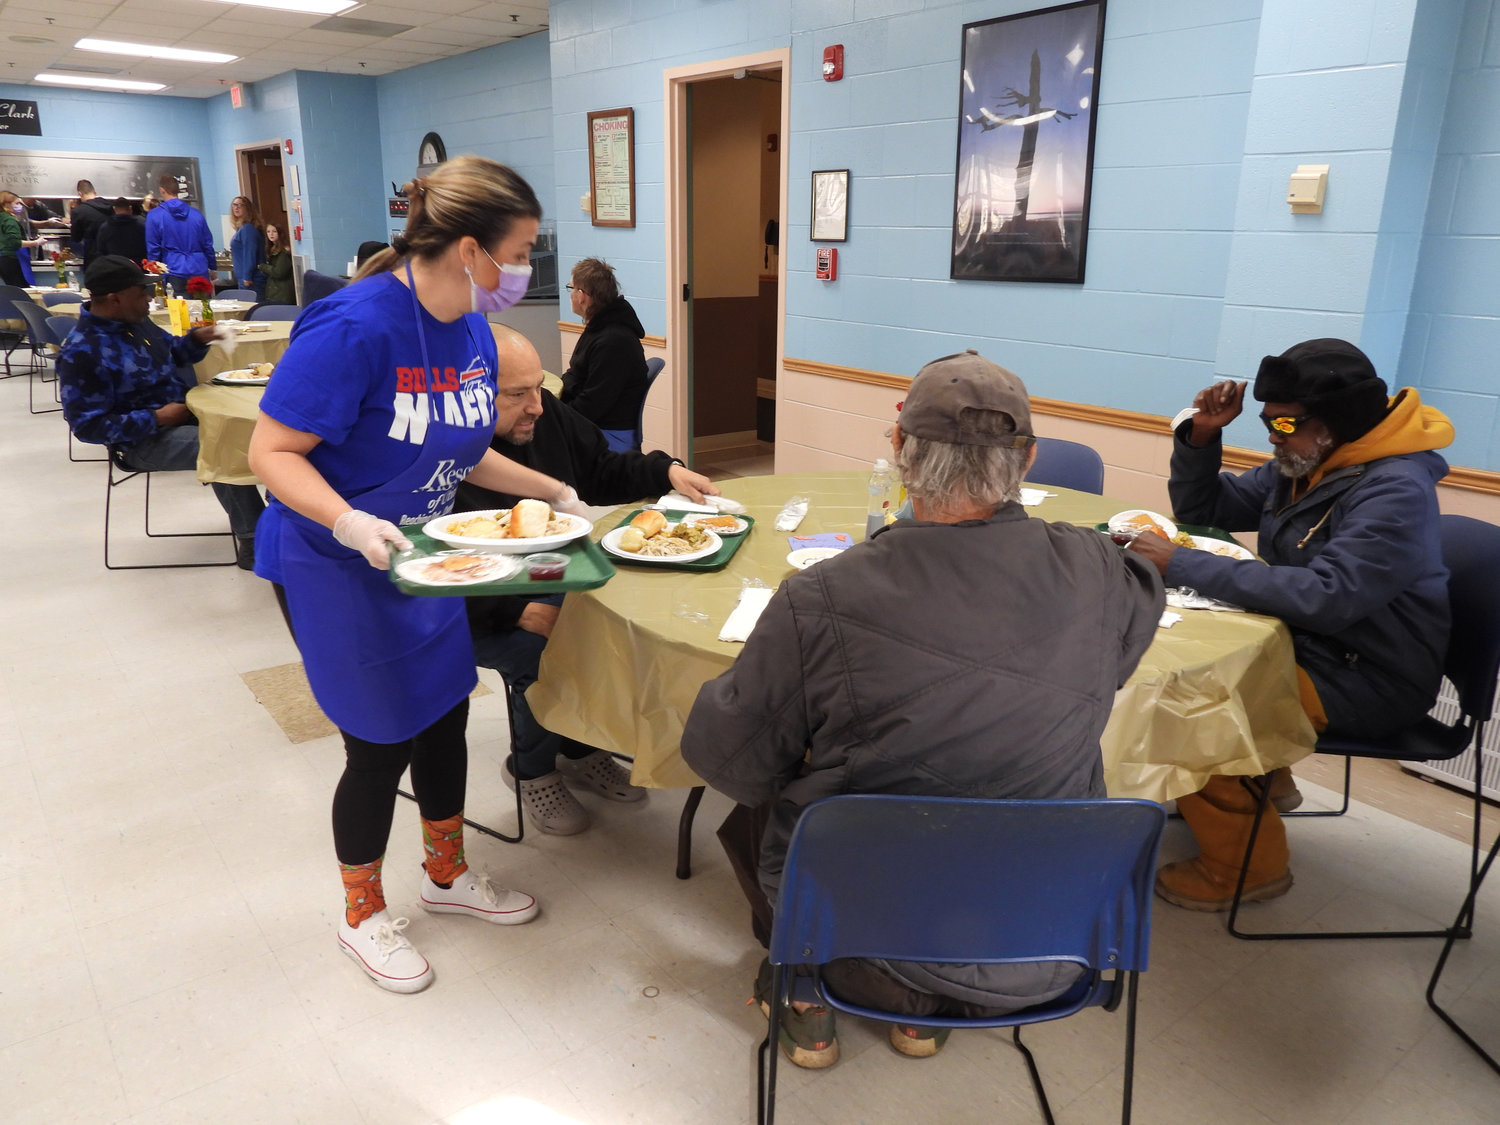 The Rescue Mission is devoted to feeding the community whenever they can, but Thanksgiving is a time when everyone should be able to sit down with friends and family for a holiday meal. Pictured is the Utica Rescue Mission, handing out plates for their Thanksgiving Luncheon